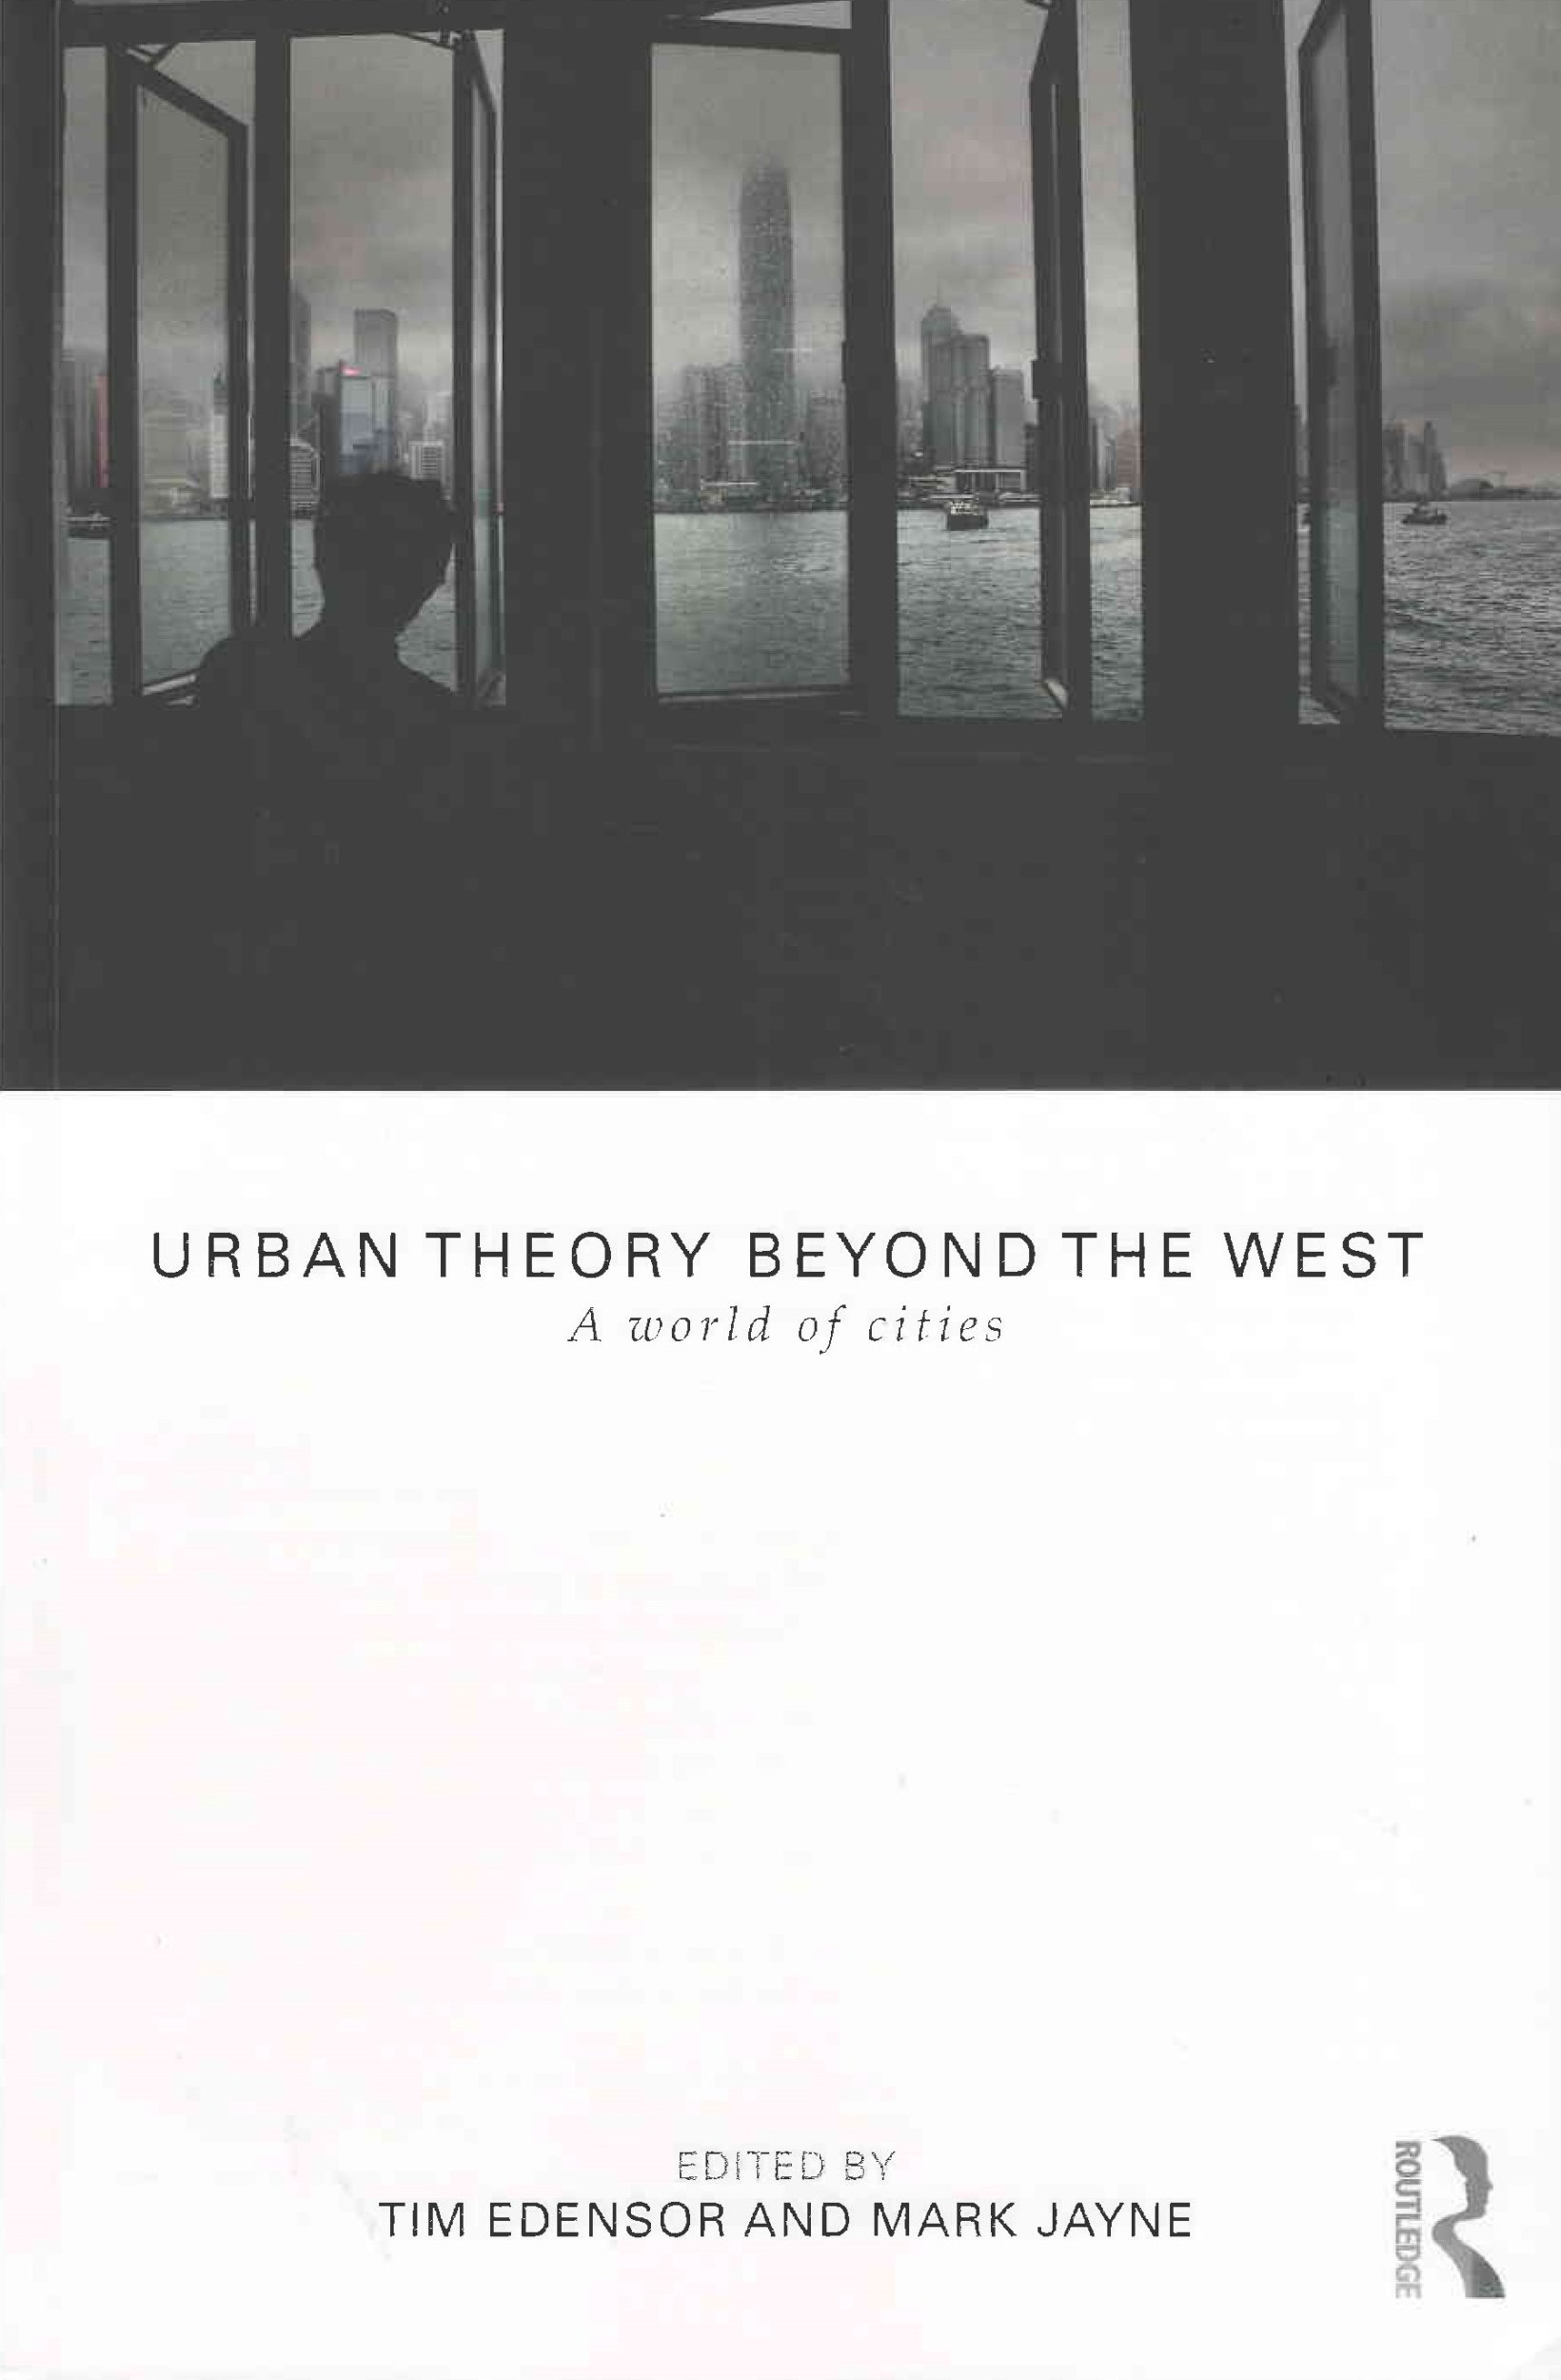 Urban theory beyond the West : a world of cities